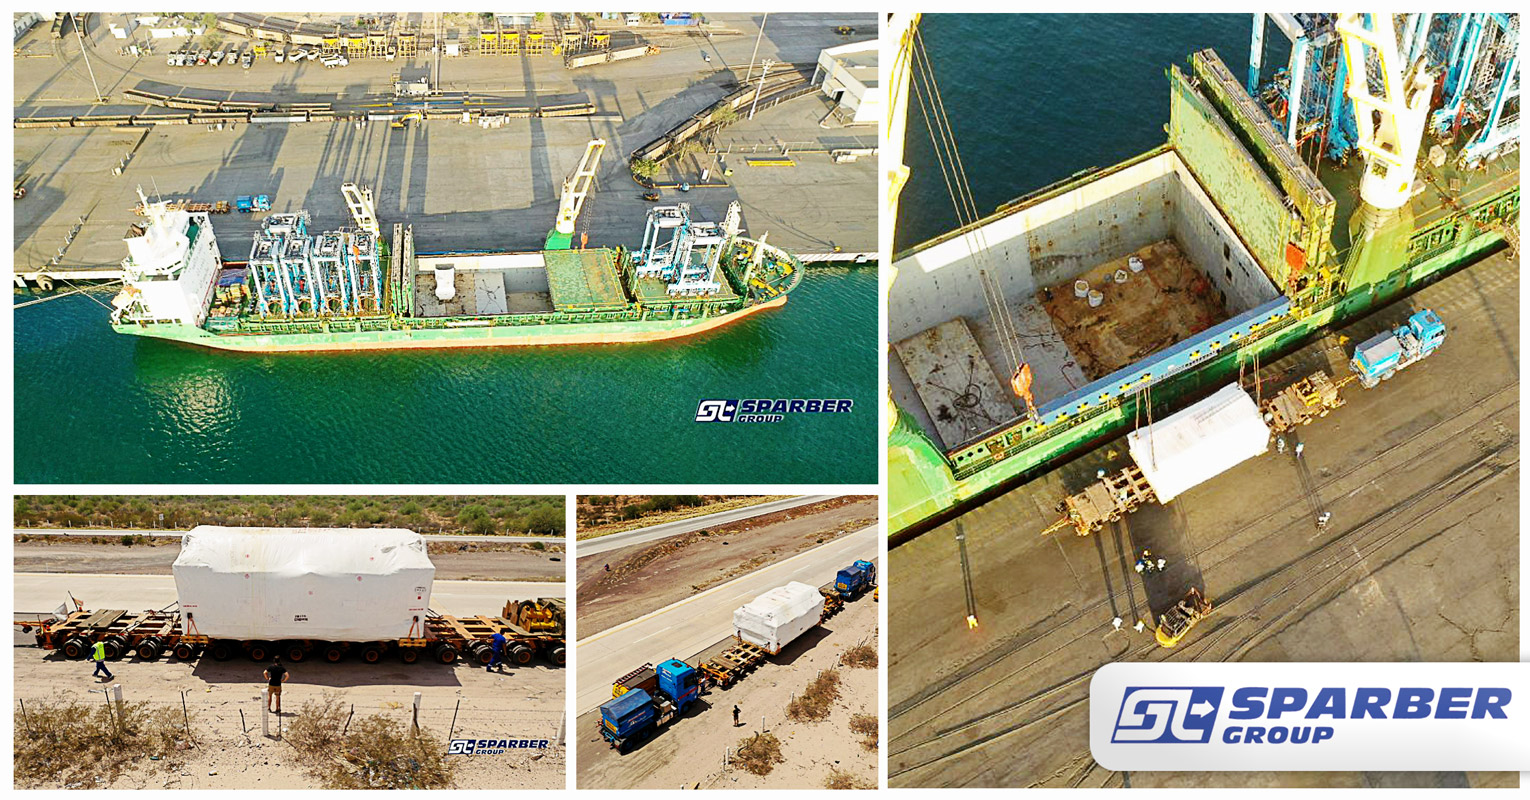 Sparber Group Handled a 685 m3 730 mt Shipment of Metal Forming Machinery from Spain to Mexico